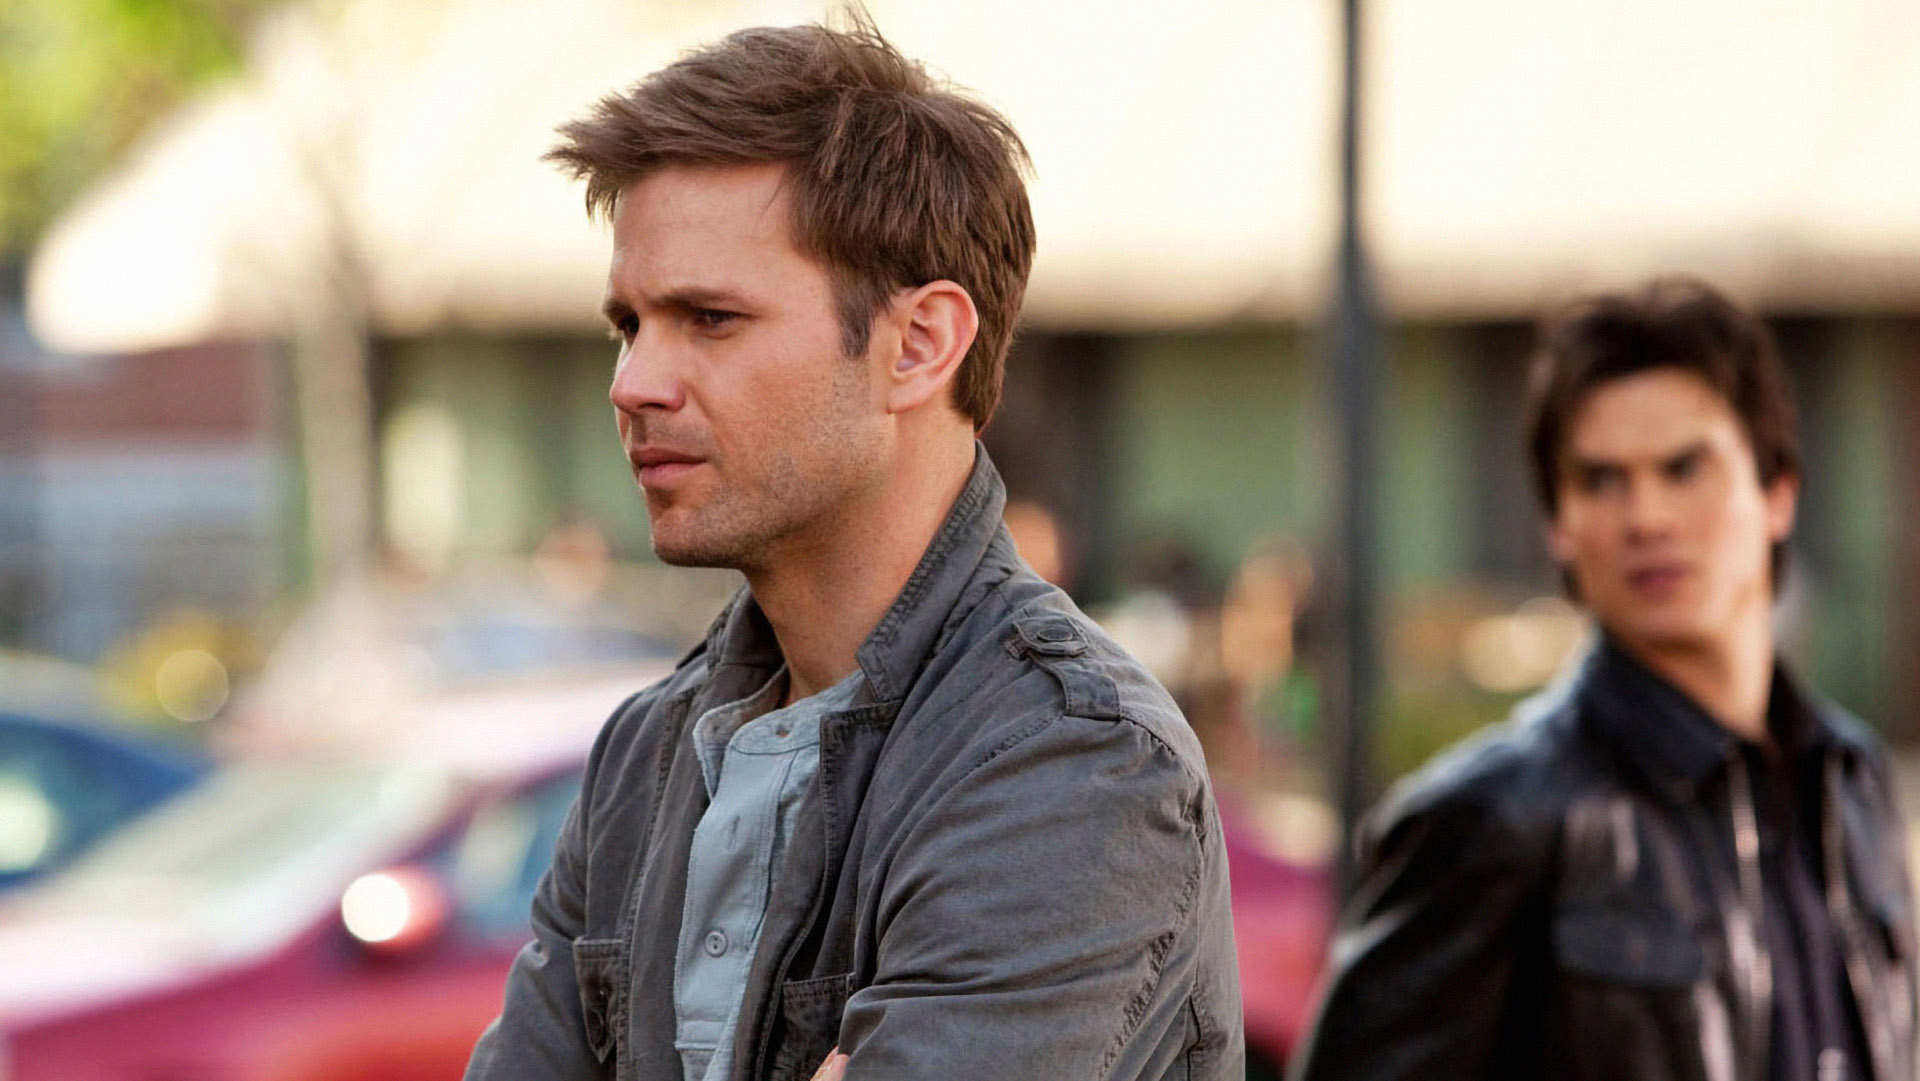 So, What's the Story With Vampire Diaries' Matt Davis Being a Creep, Allegedly?